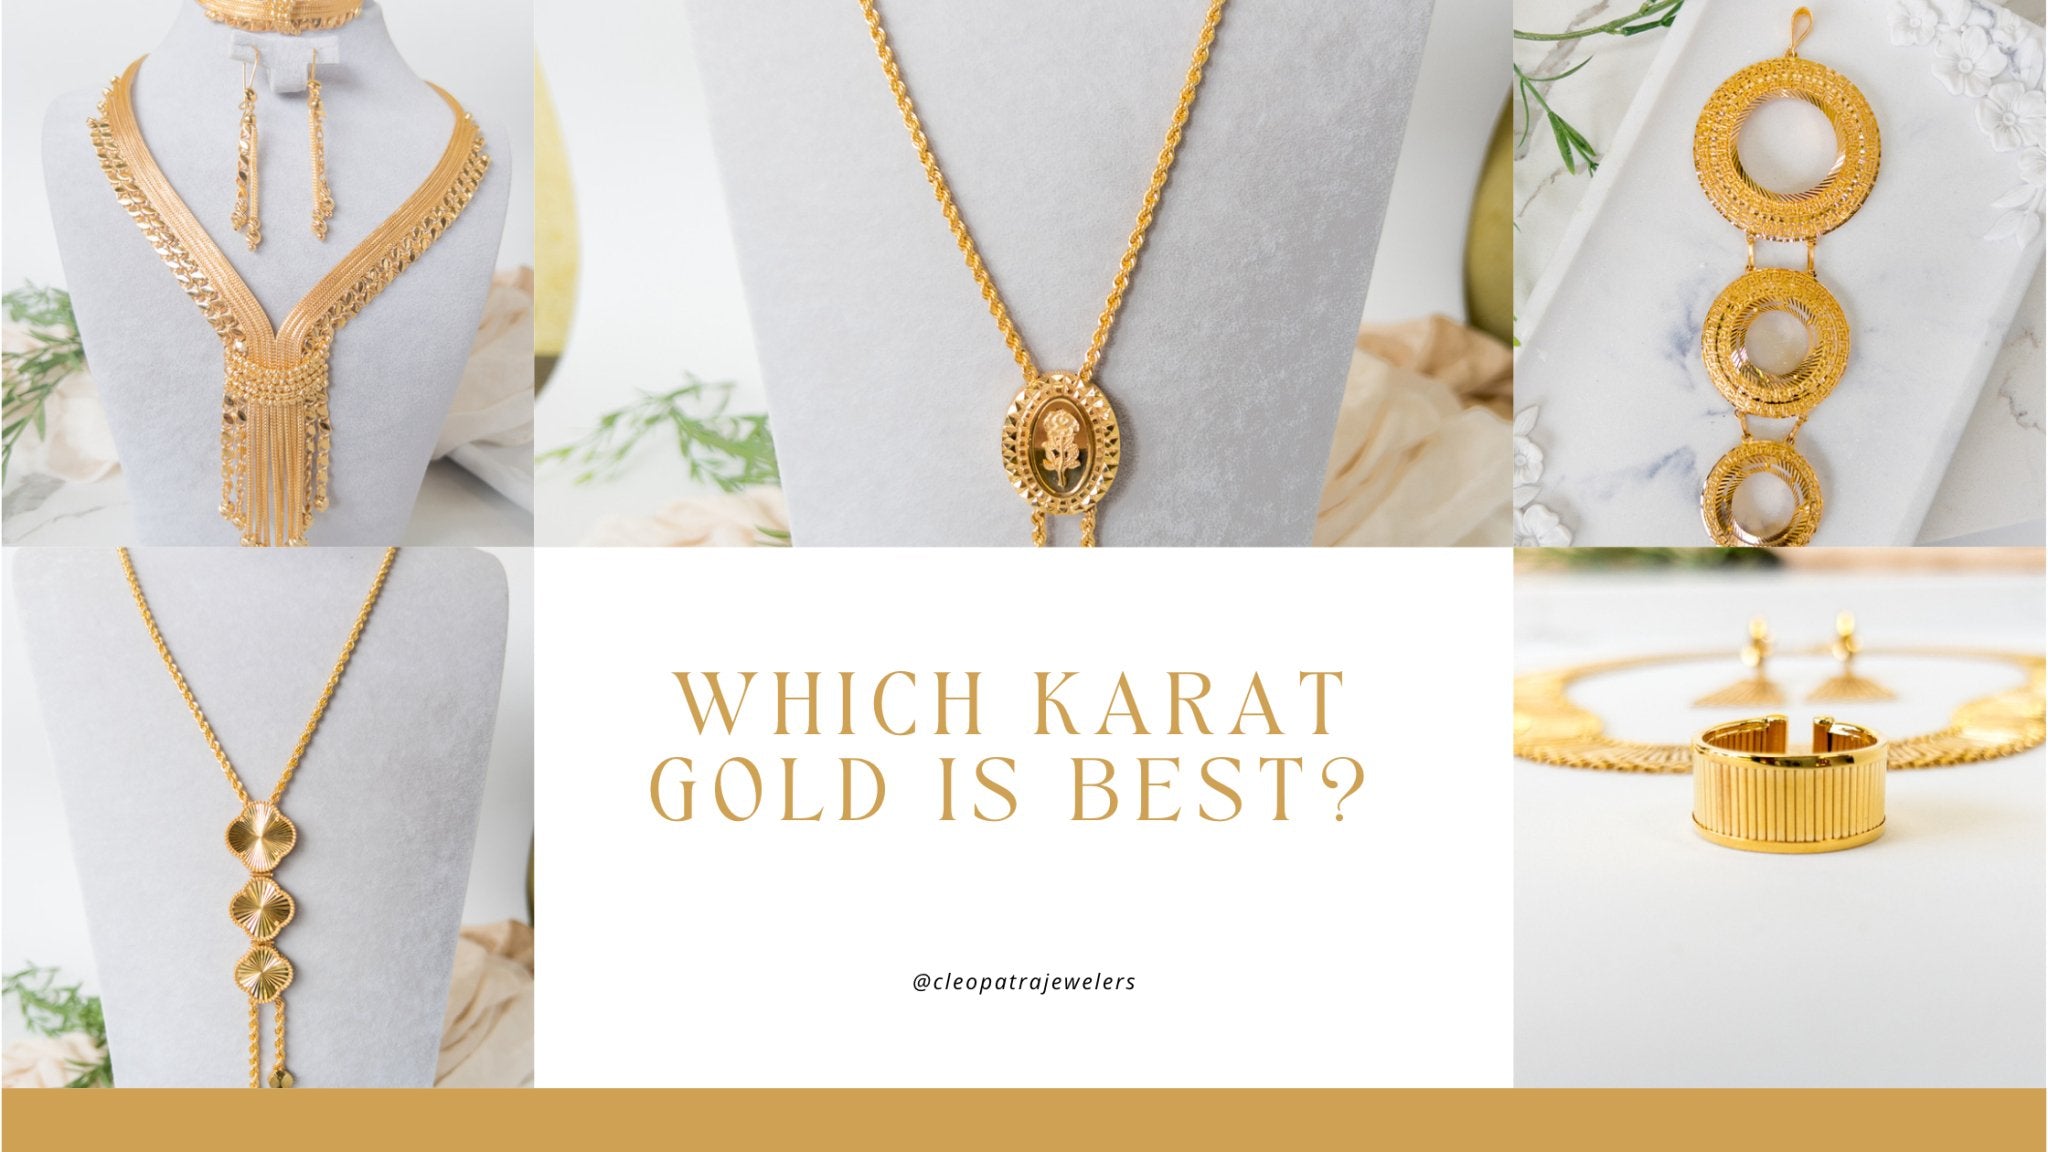 Which karat gold is best? - Cleopatra Jewelers